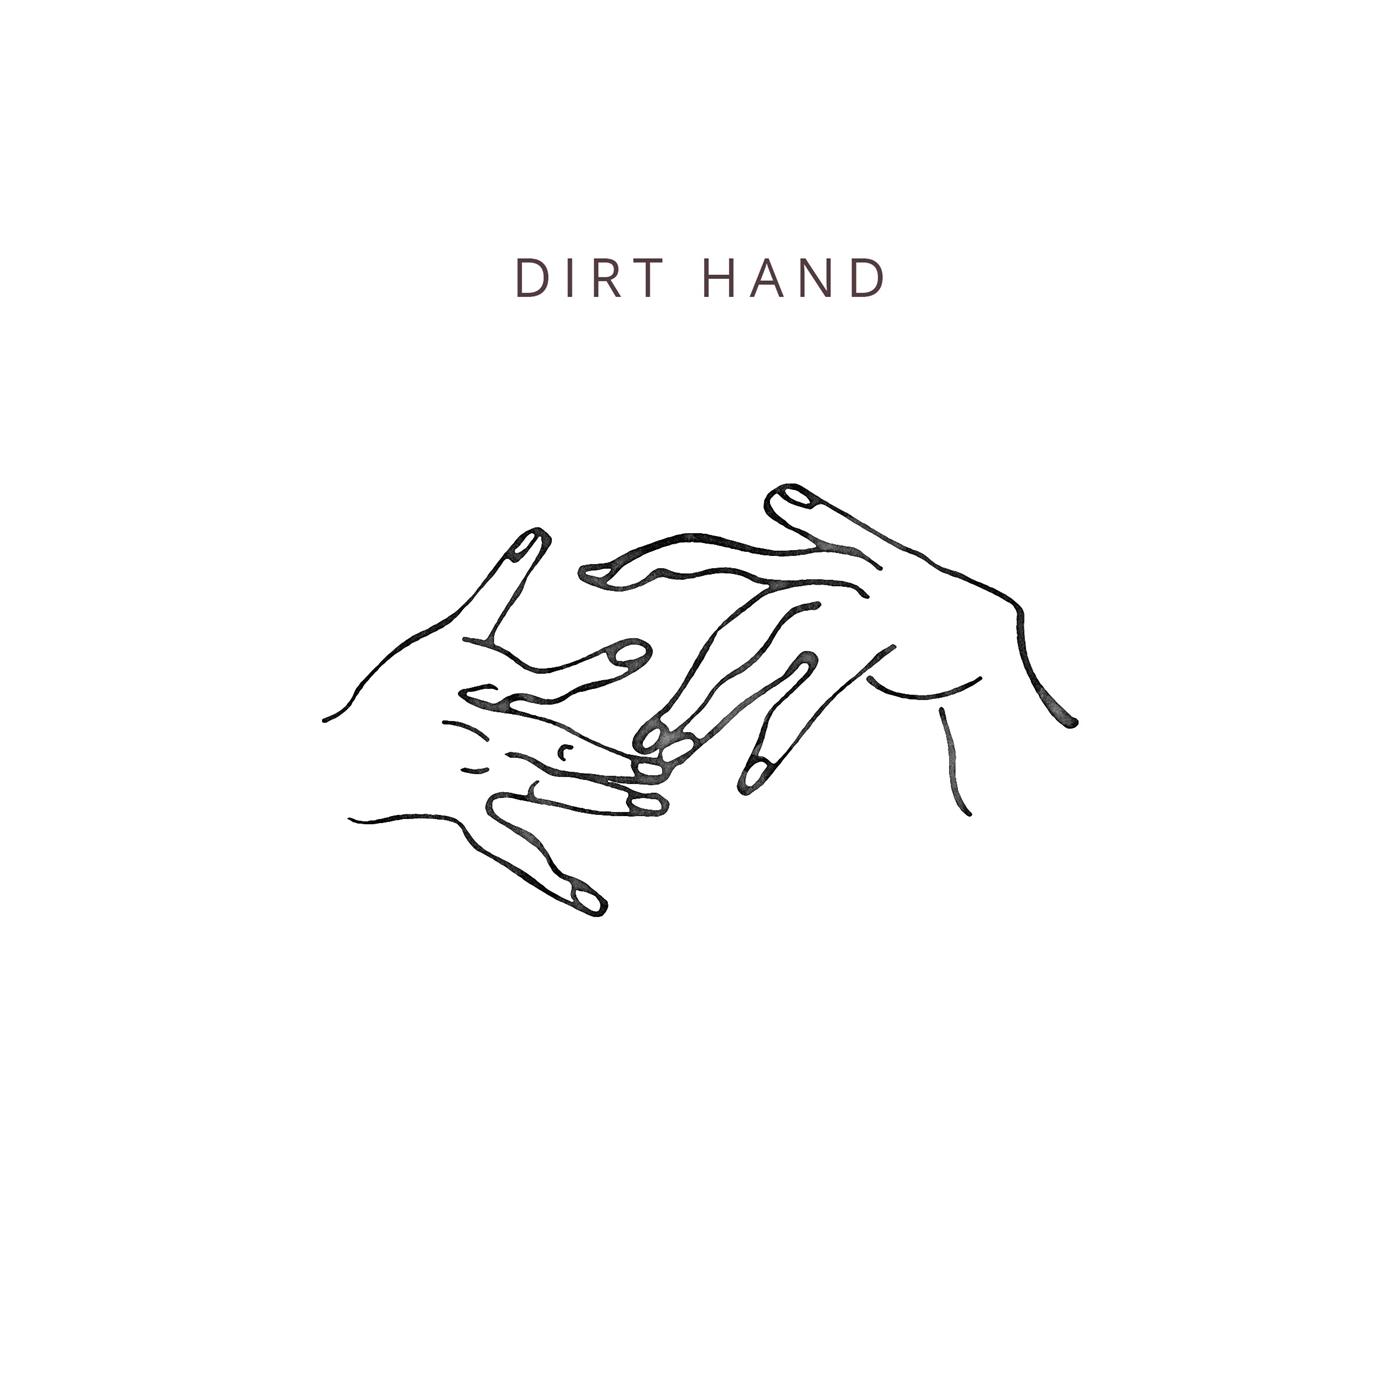 The Dirt Hand EP